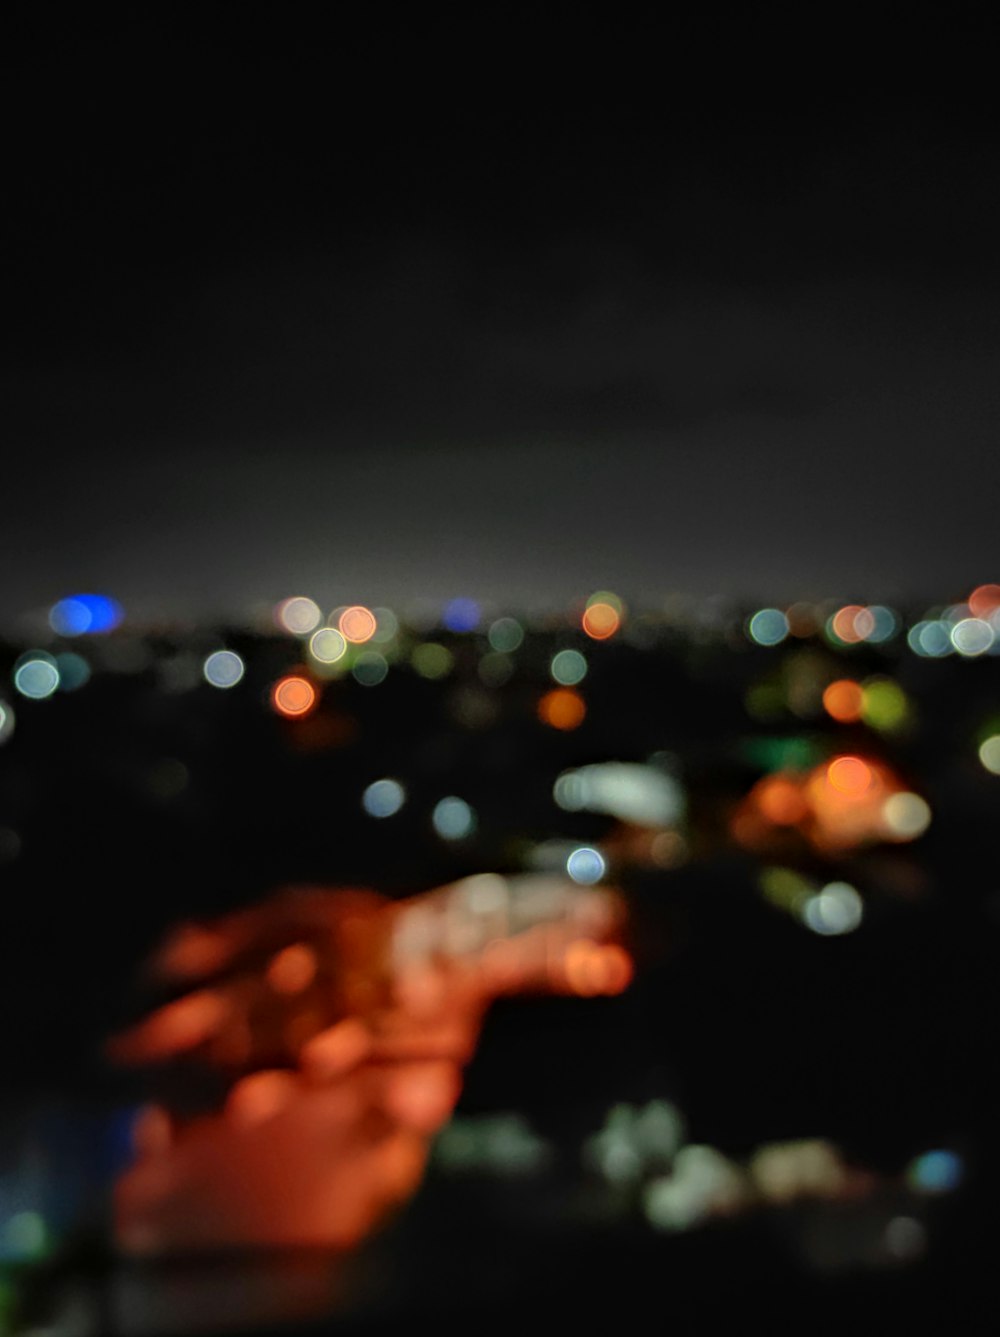 blurry image of a city